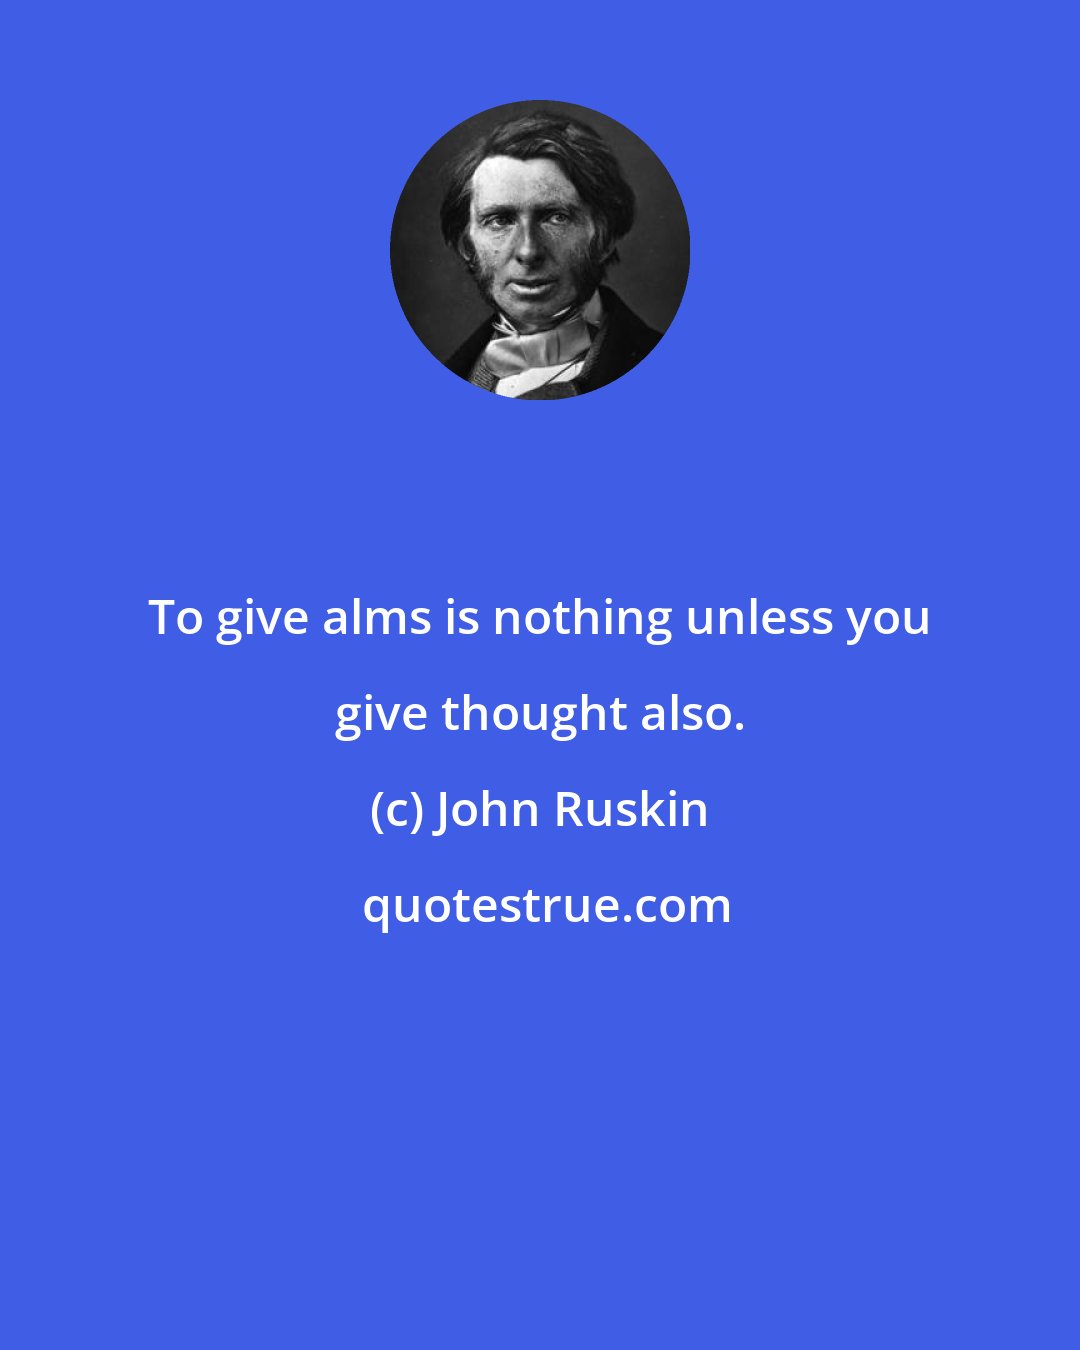 John Ruskin: To give alms is nothing unless you give thought also.